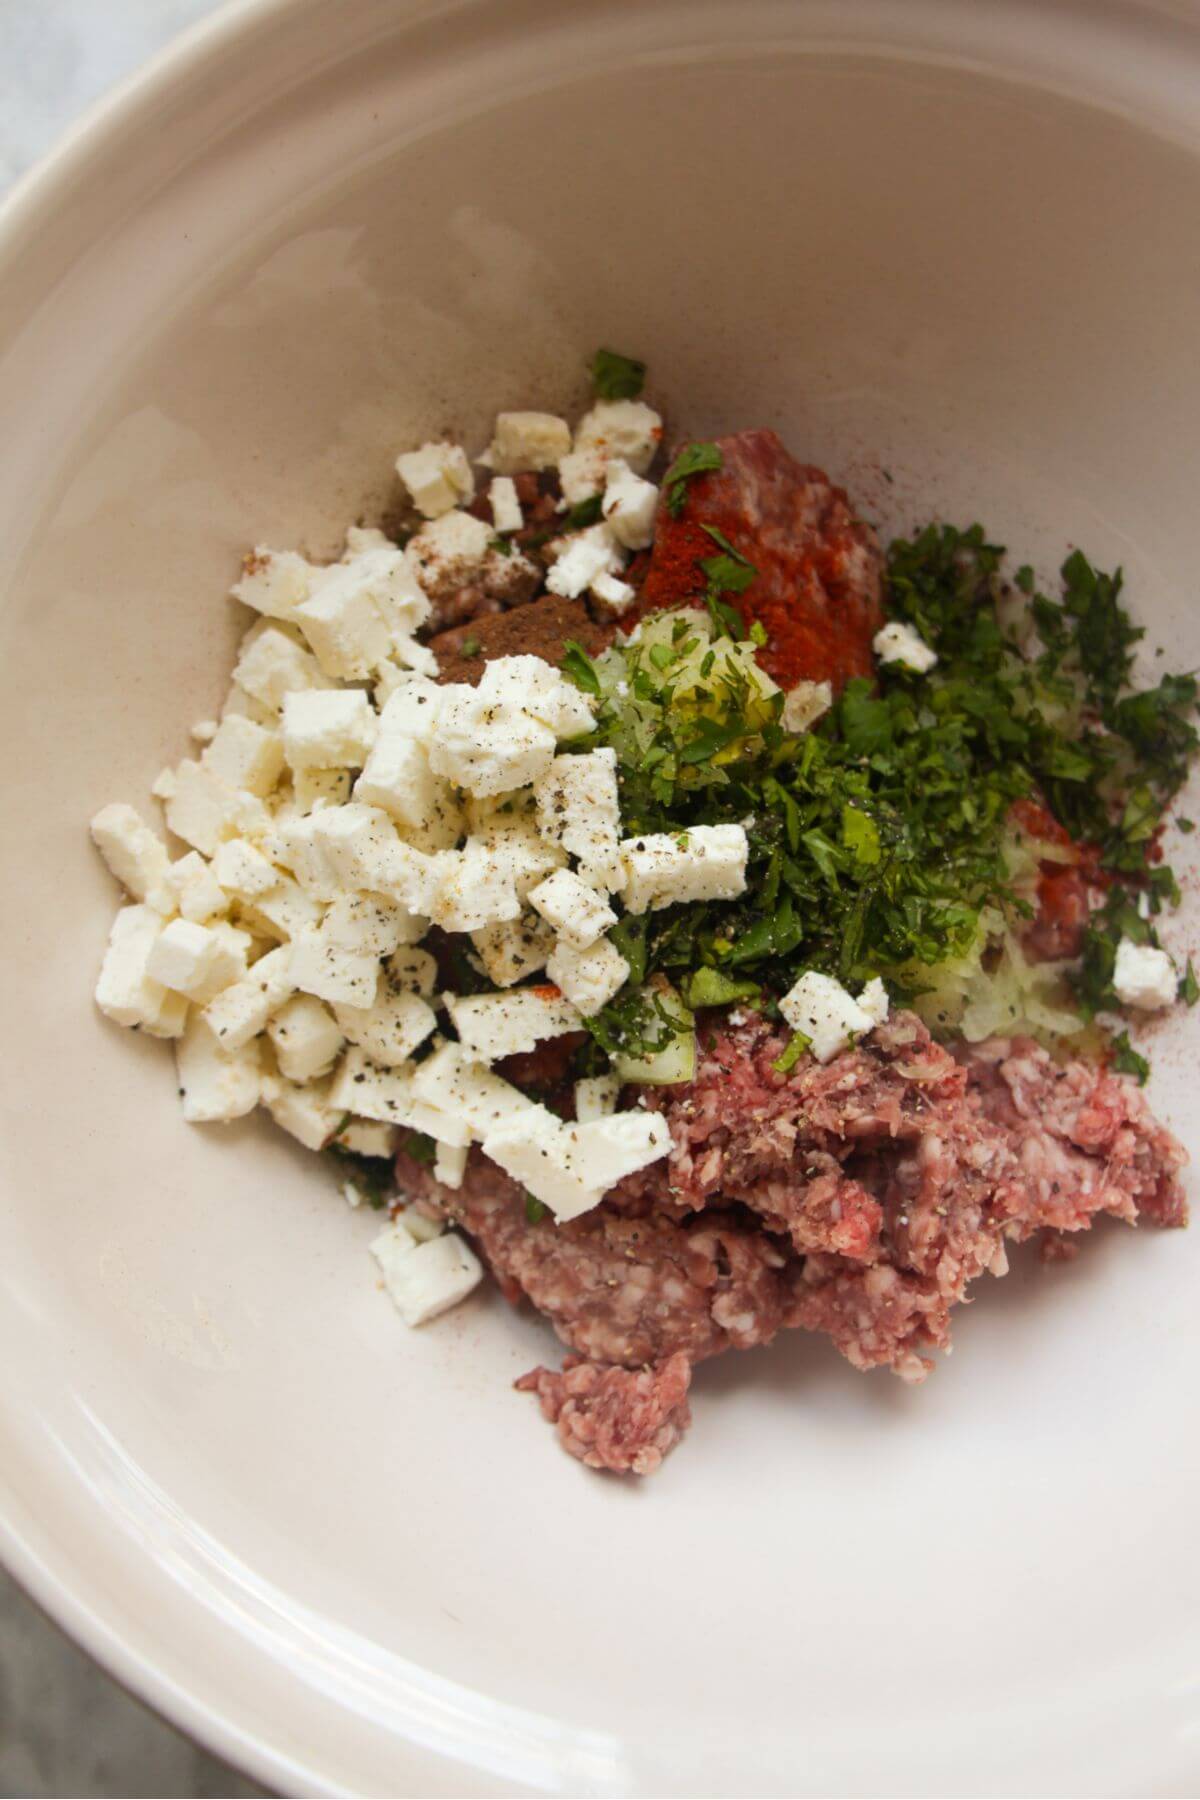 Lamb mince, feta, herbs, spices in a large white mixing bowl.